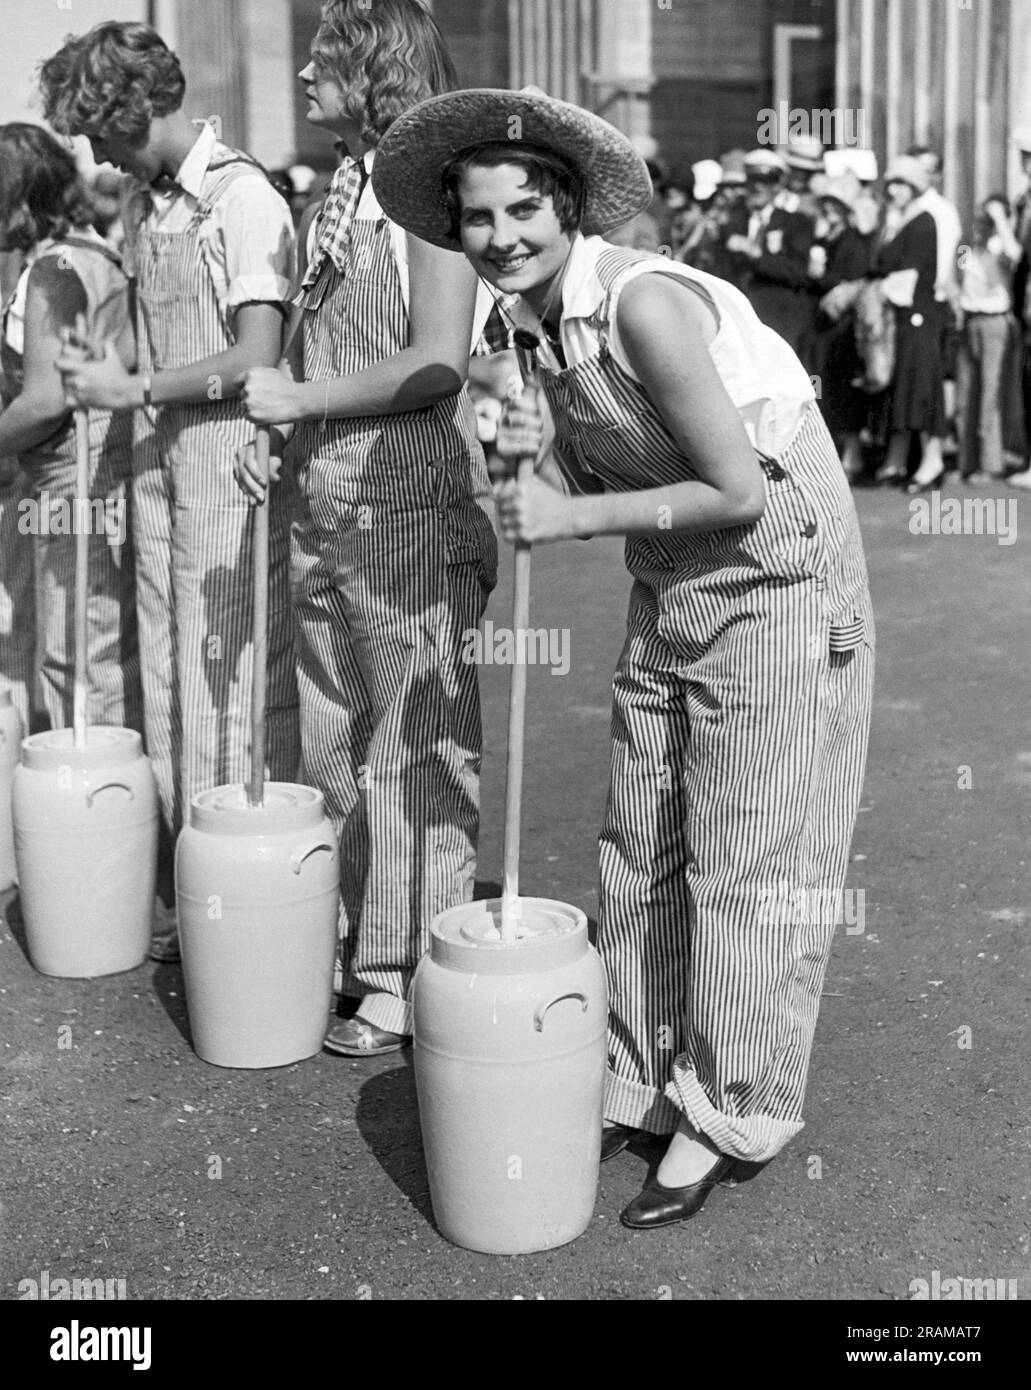 Pomona, California:  c. 1930 Lucille Gates is this year's winner of the American Farm Girl Championships being held at the Los Angeles County Fair. Here she is in action during the butter churning event. Stock Photo